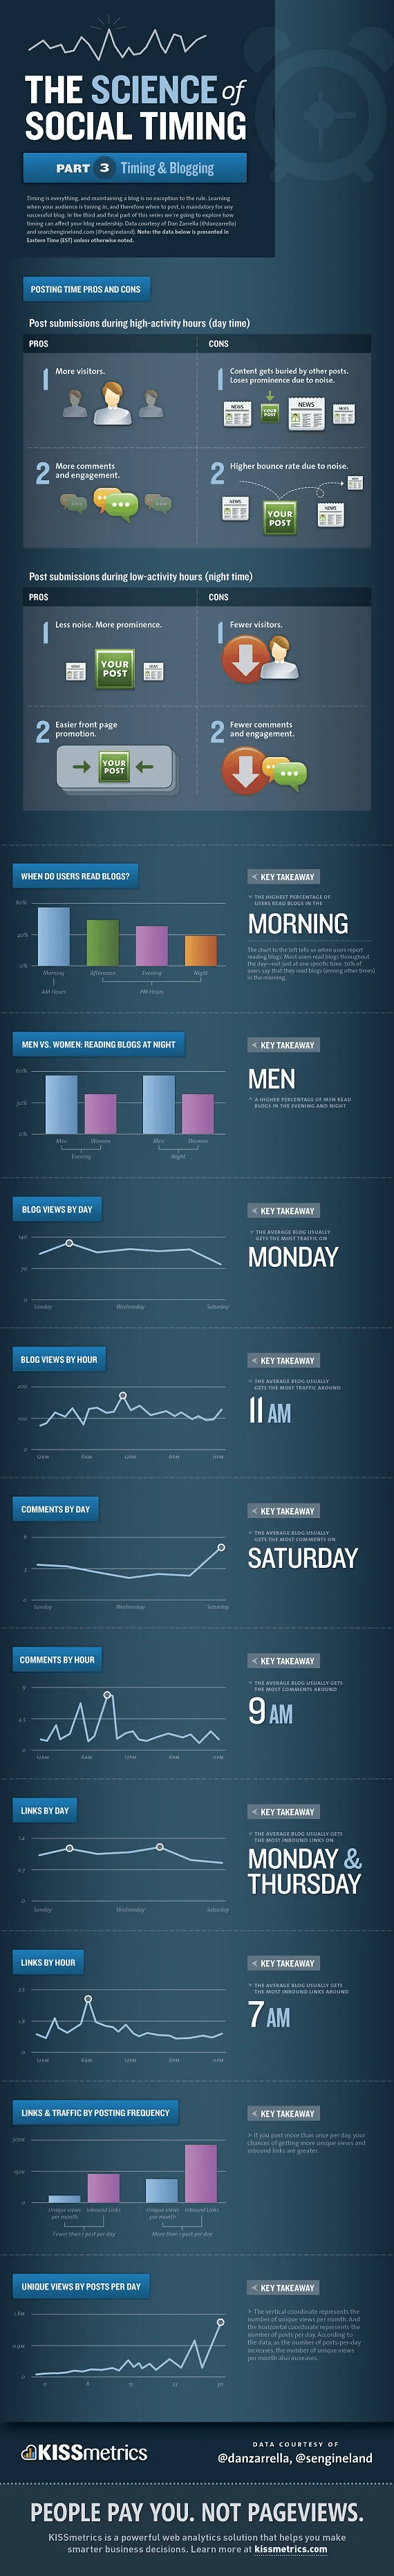 science of social timing infographic